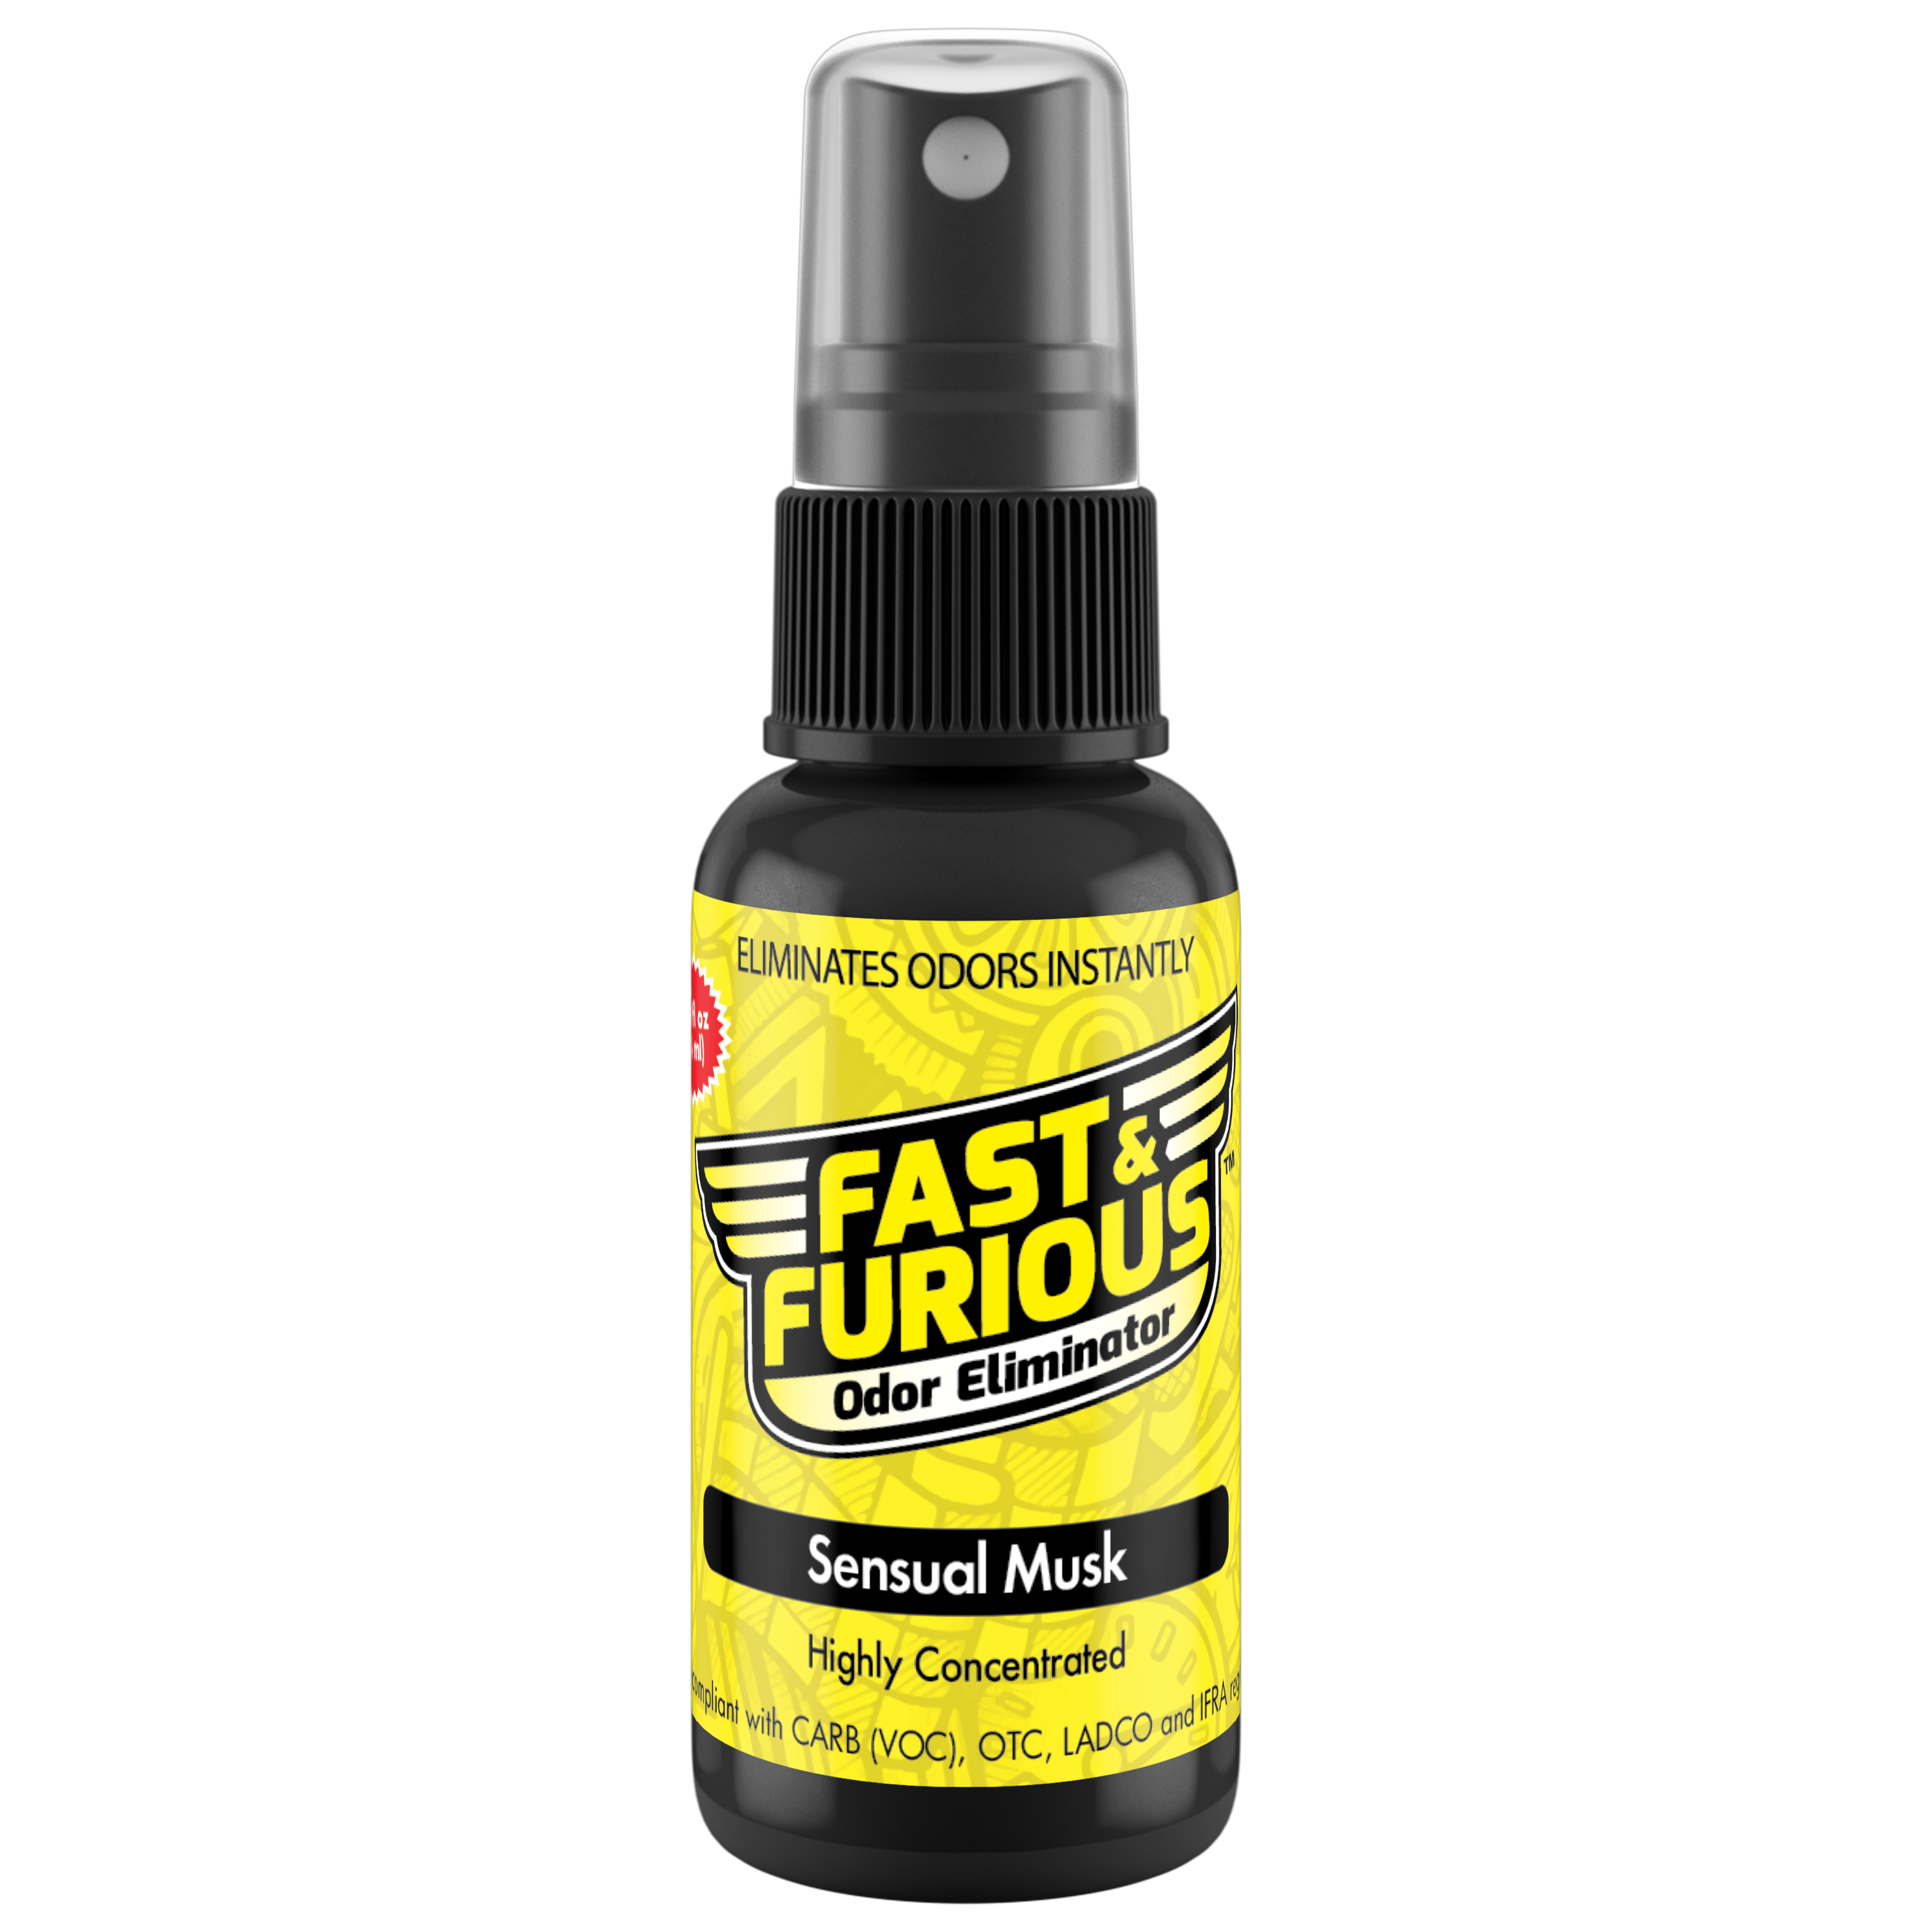 Fast and Furious Odor Eliminator - Sensual Musk Scent